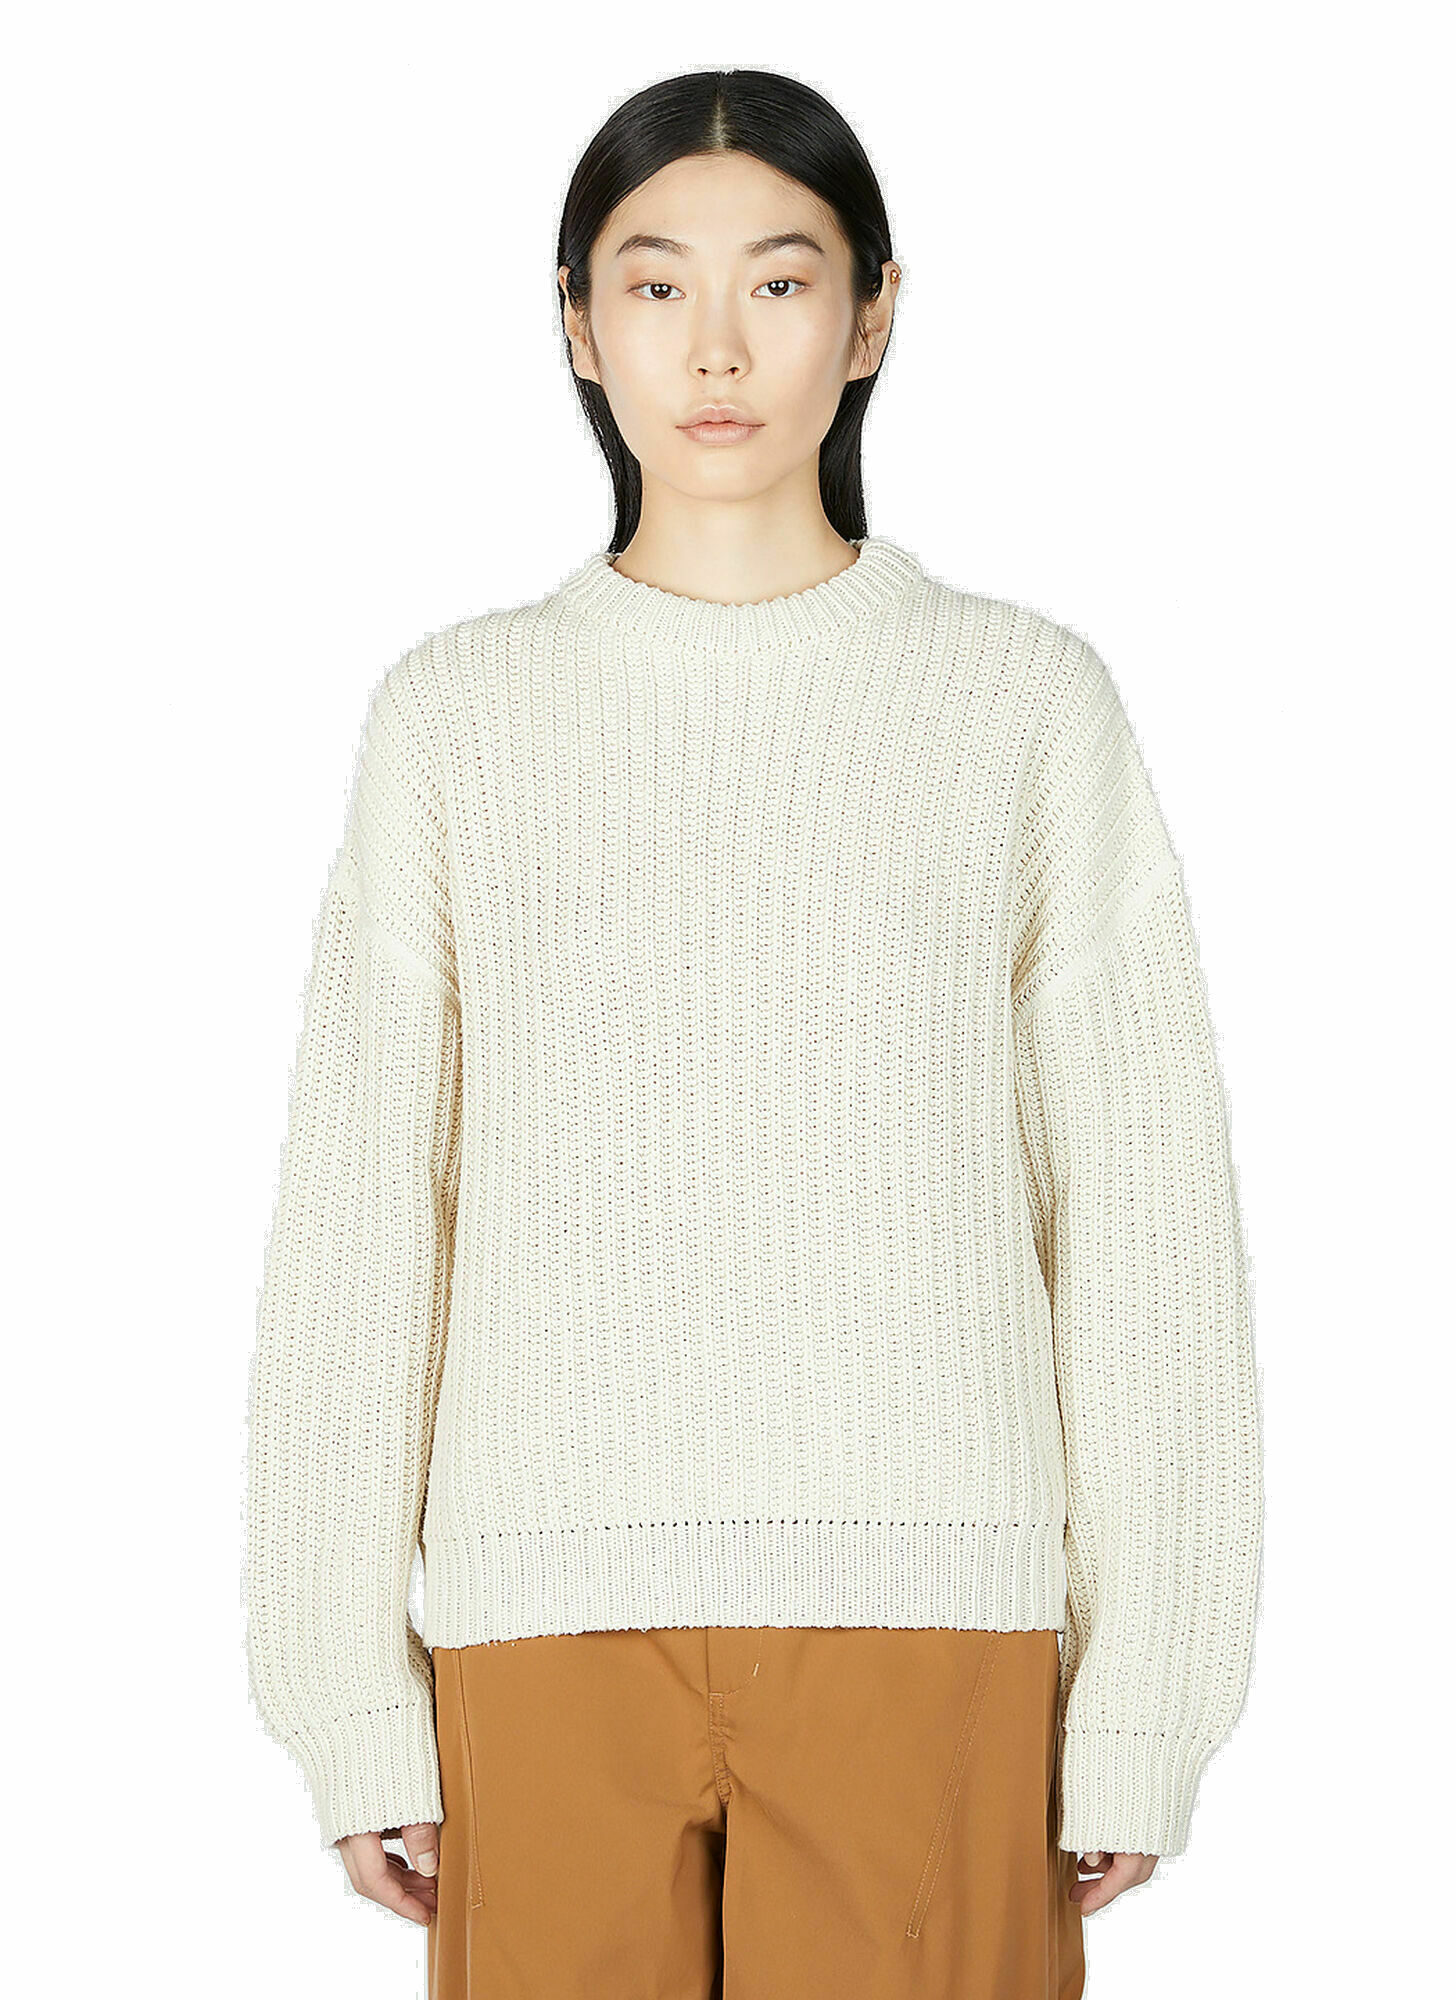 Our Legacy - Sonar Crewneck Sweater in Beige Our Legacy